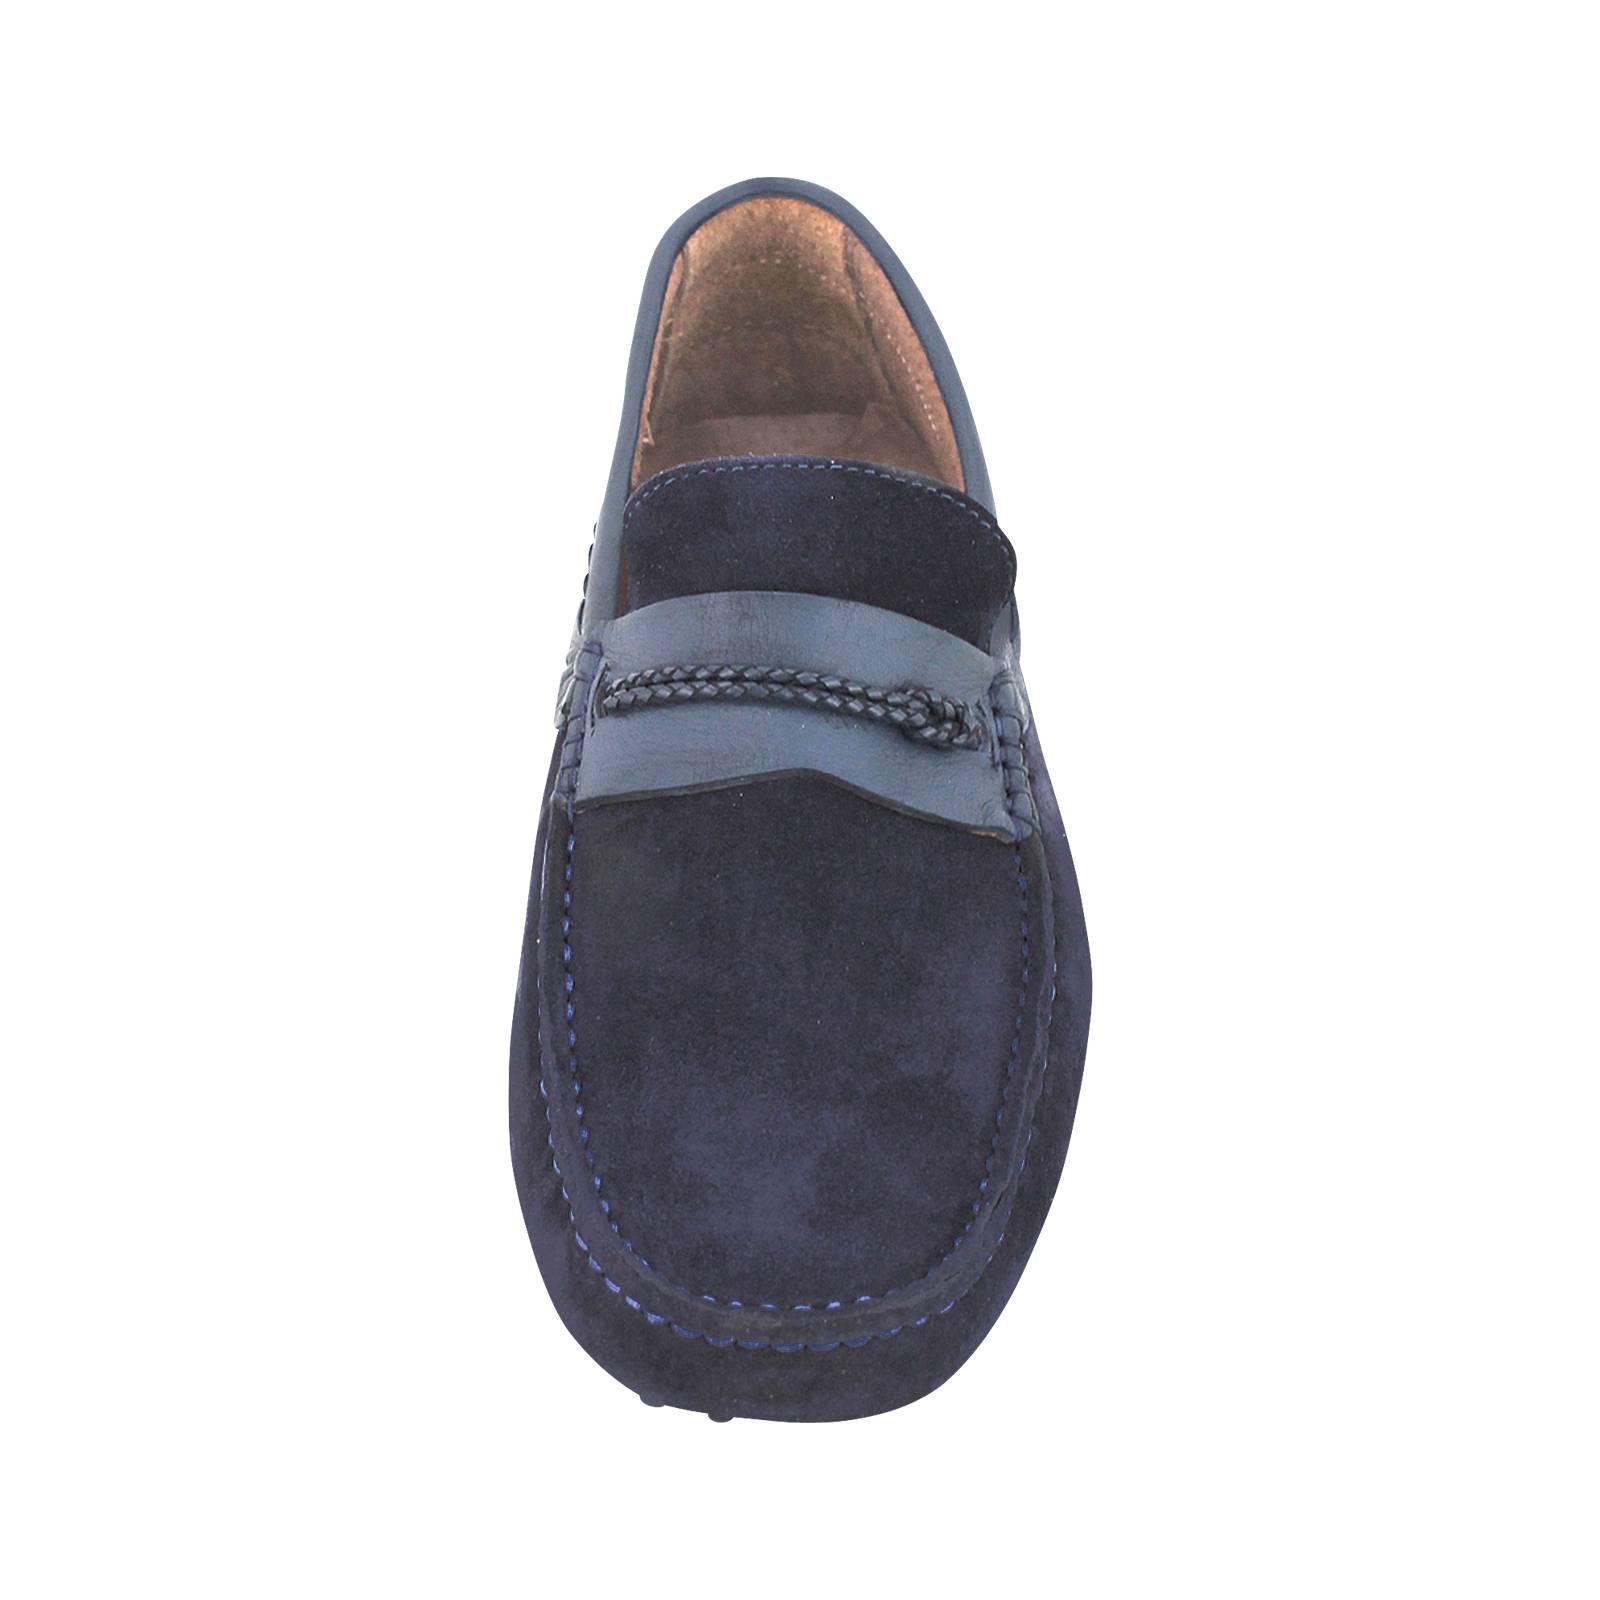 Moron - Kricket Men's mocassins made of suede and leather - Gianna ...